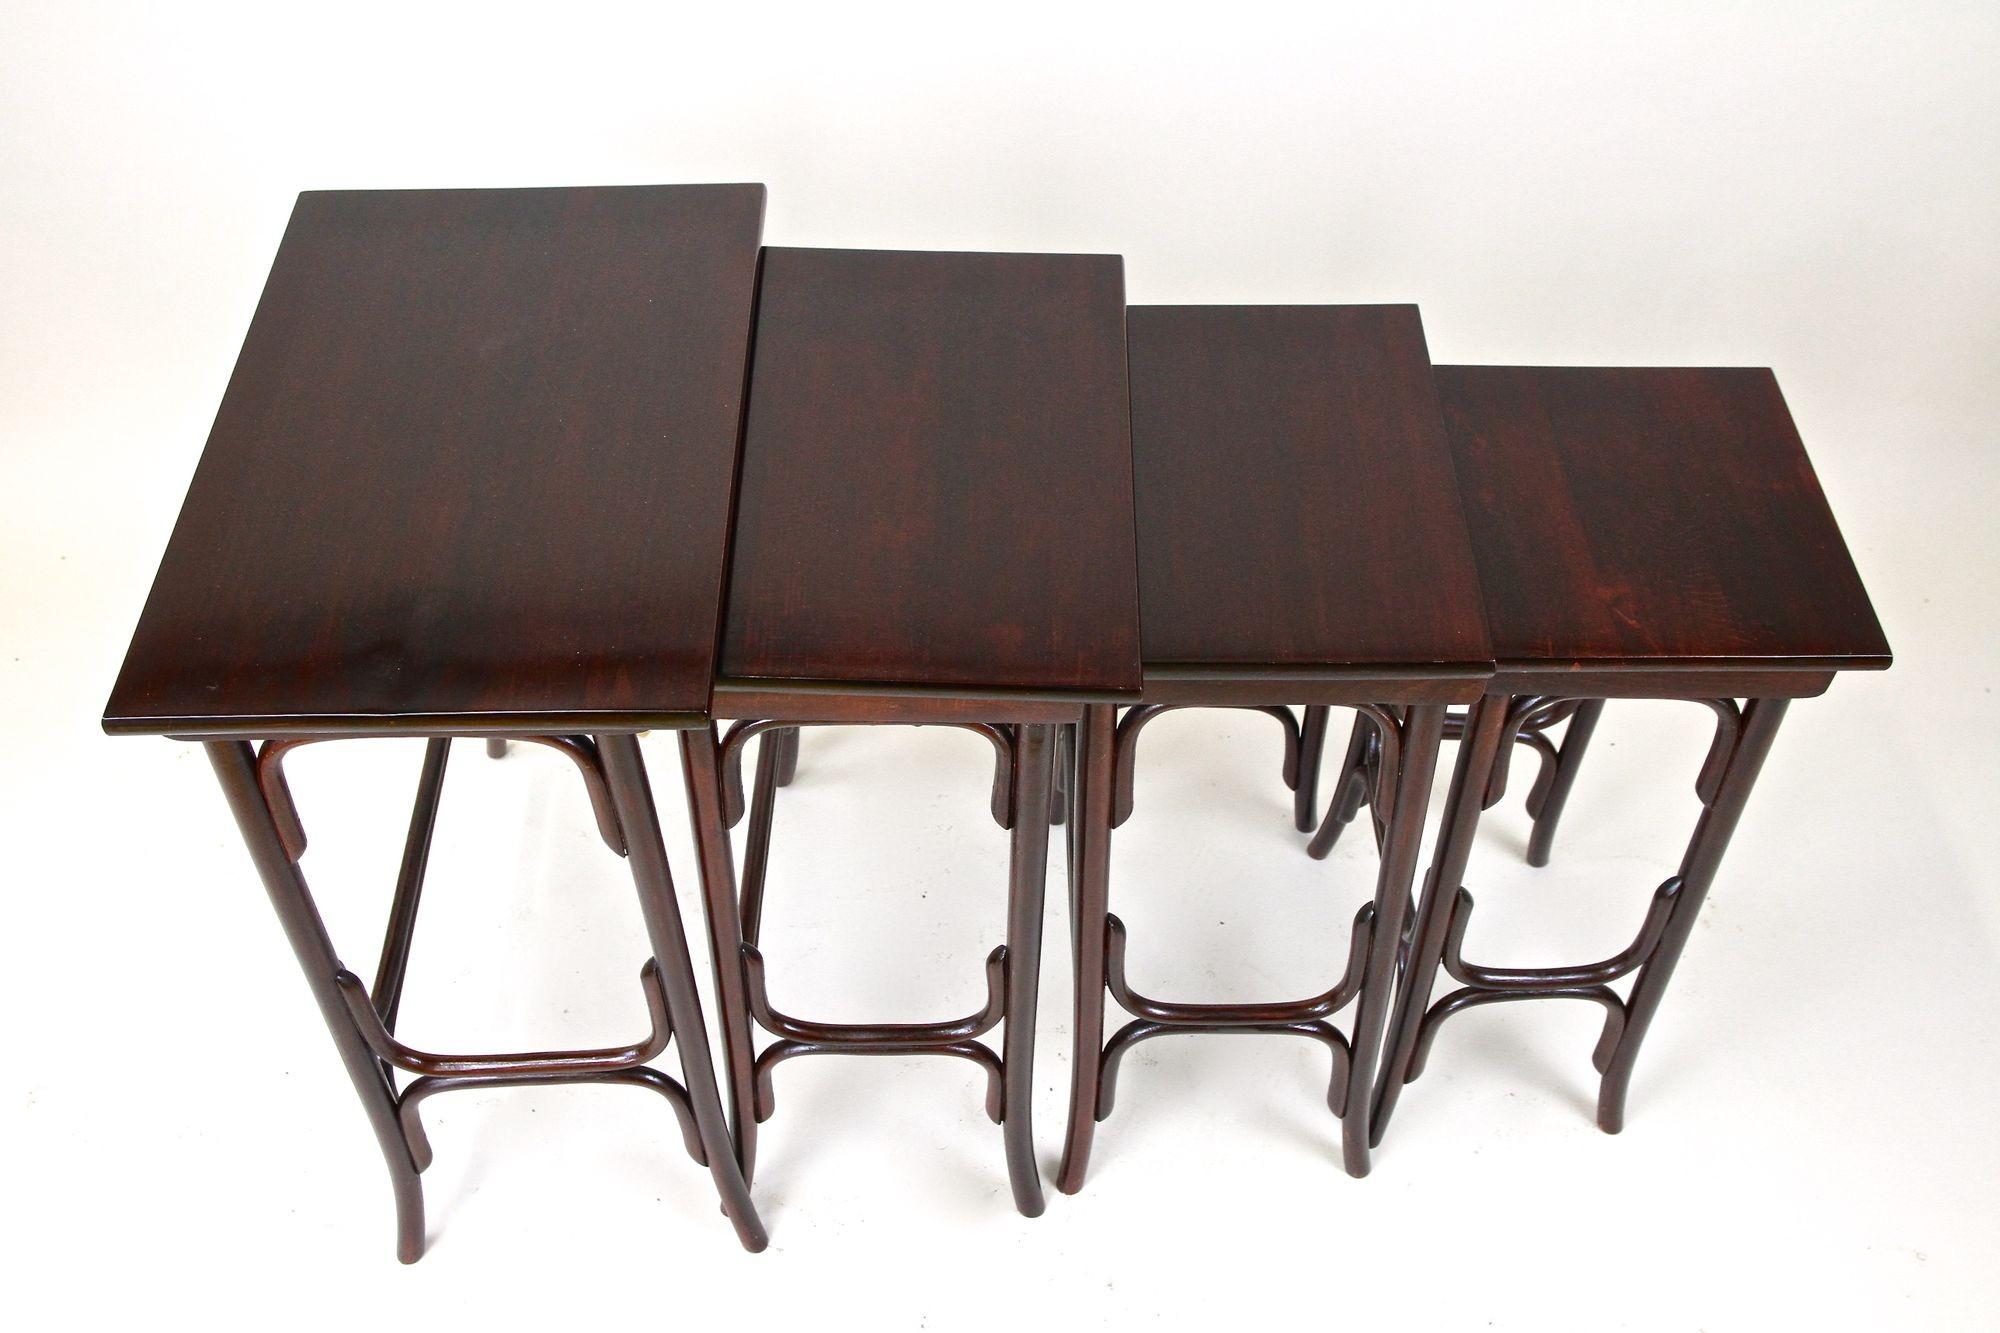 Polished Art Nouveau Bentwood Nesting Tables by Thonet, Marked, Austria circa 1905